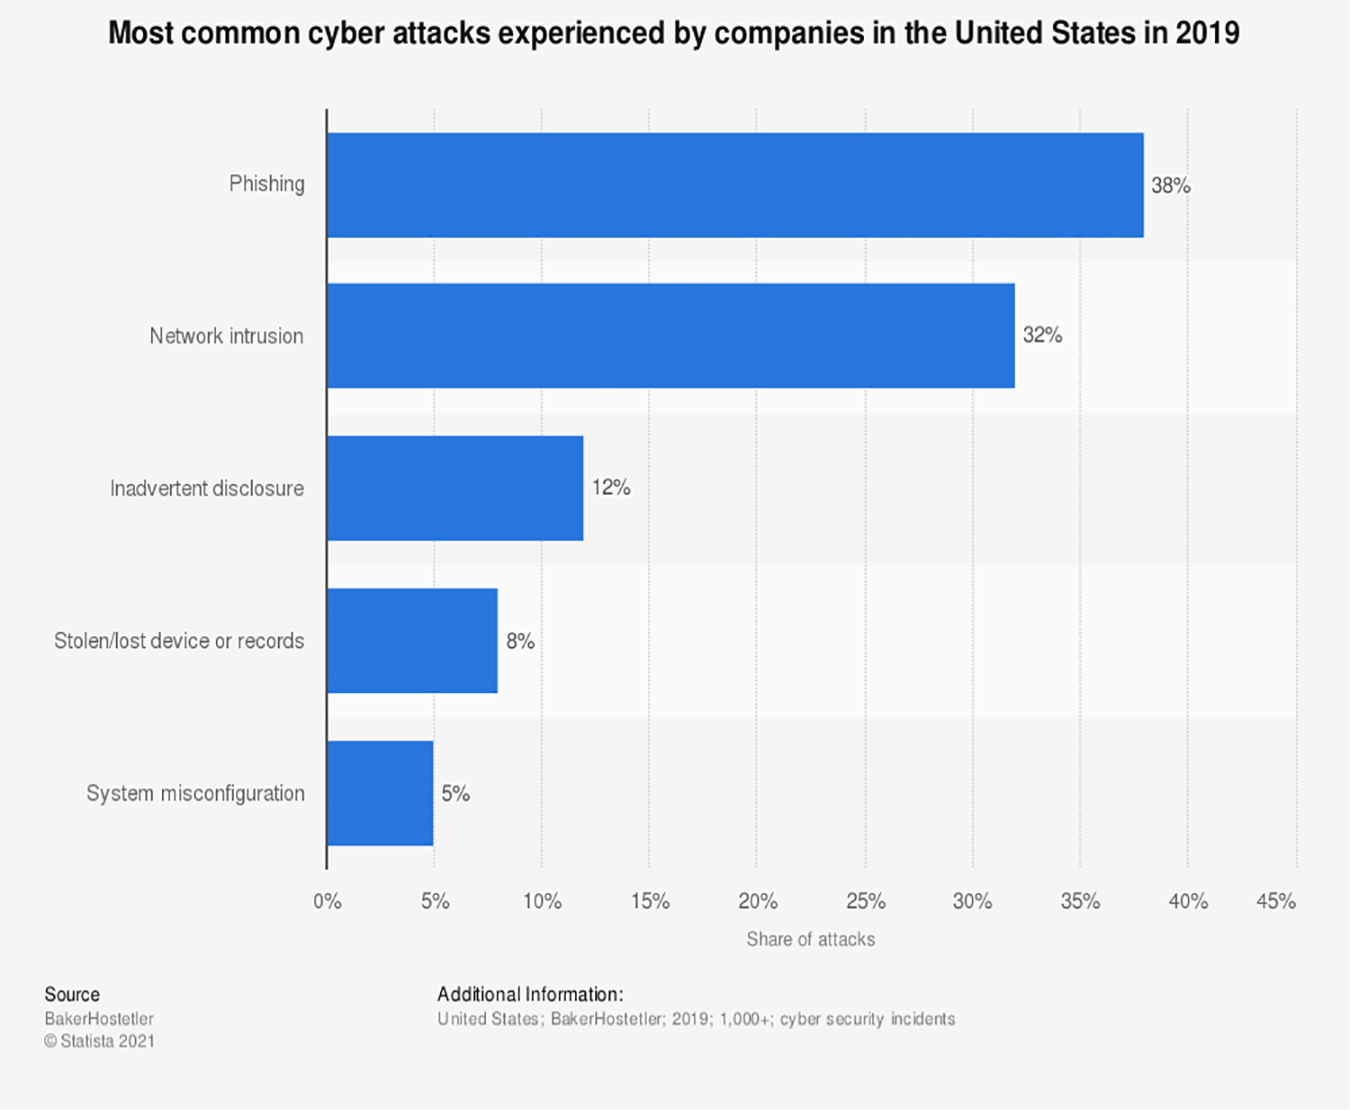 Rising manufacturing cybersecurity threats shared by all sectors. This statistic shows the types of cybercrime attacks most commonly experienced by companies in the United States in 2019. Phishing accounted for 38 percent of data security incidents of U.S. companies. Network intrusion was 32%. Inadvertent disclosure was 12%. Stolen or lost device or records was 8%. System misconfiguration was 5% of cyberattacks